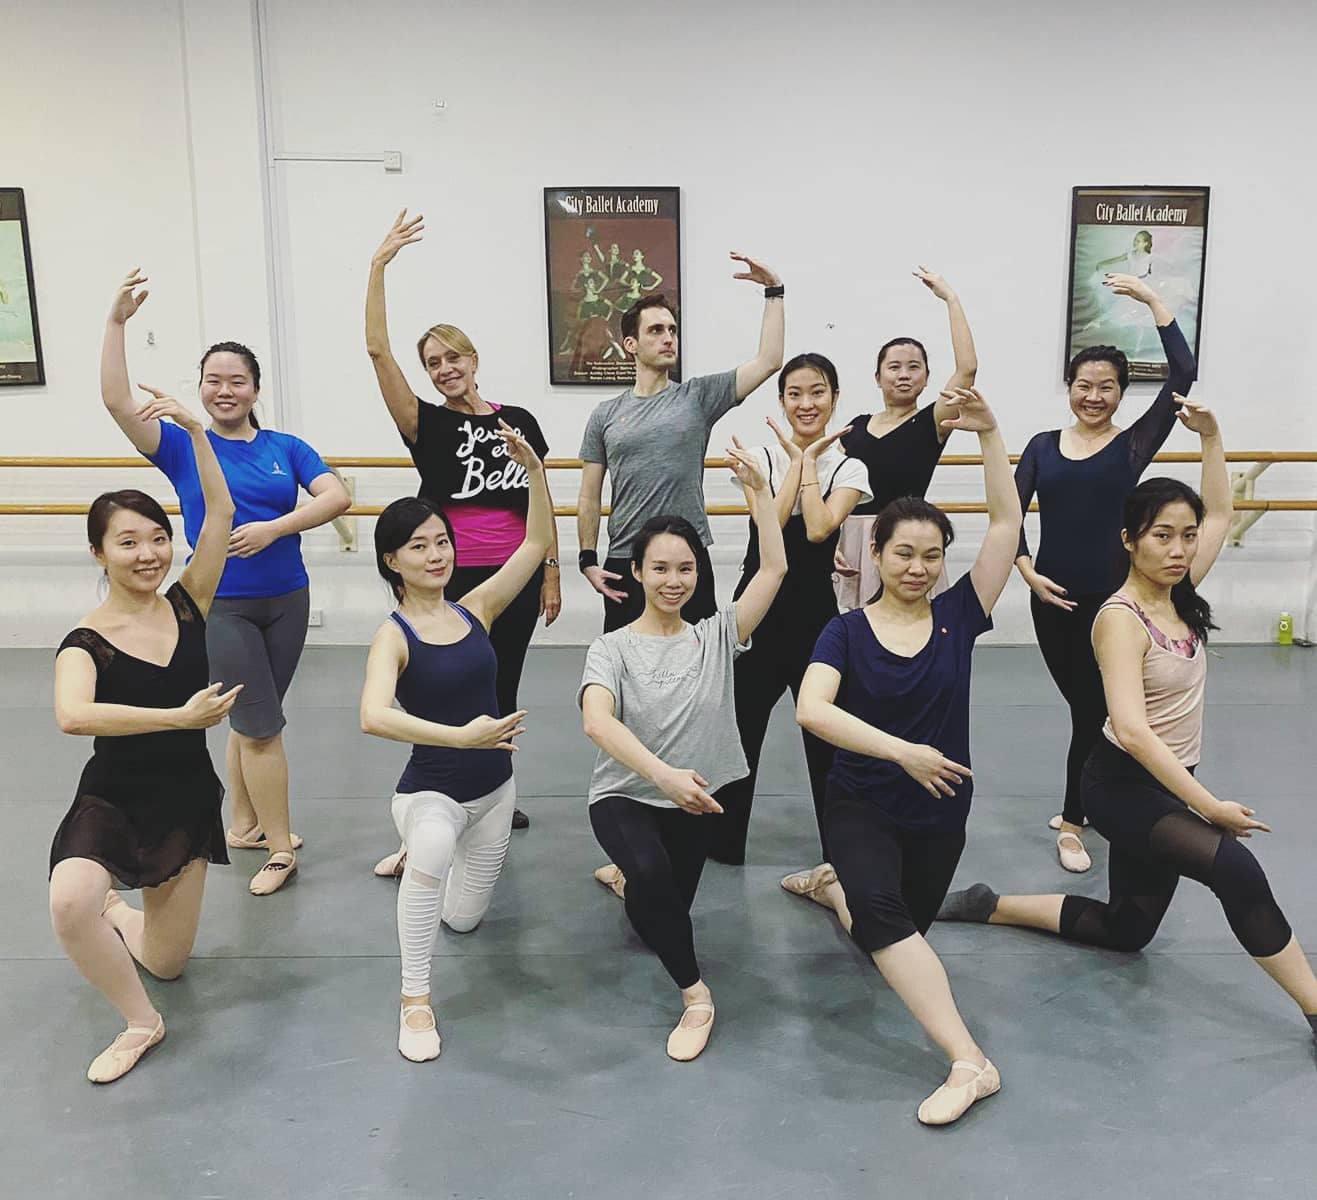 Adult ballet classes at City Ballet Academy